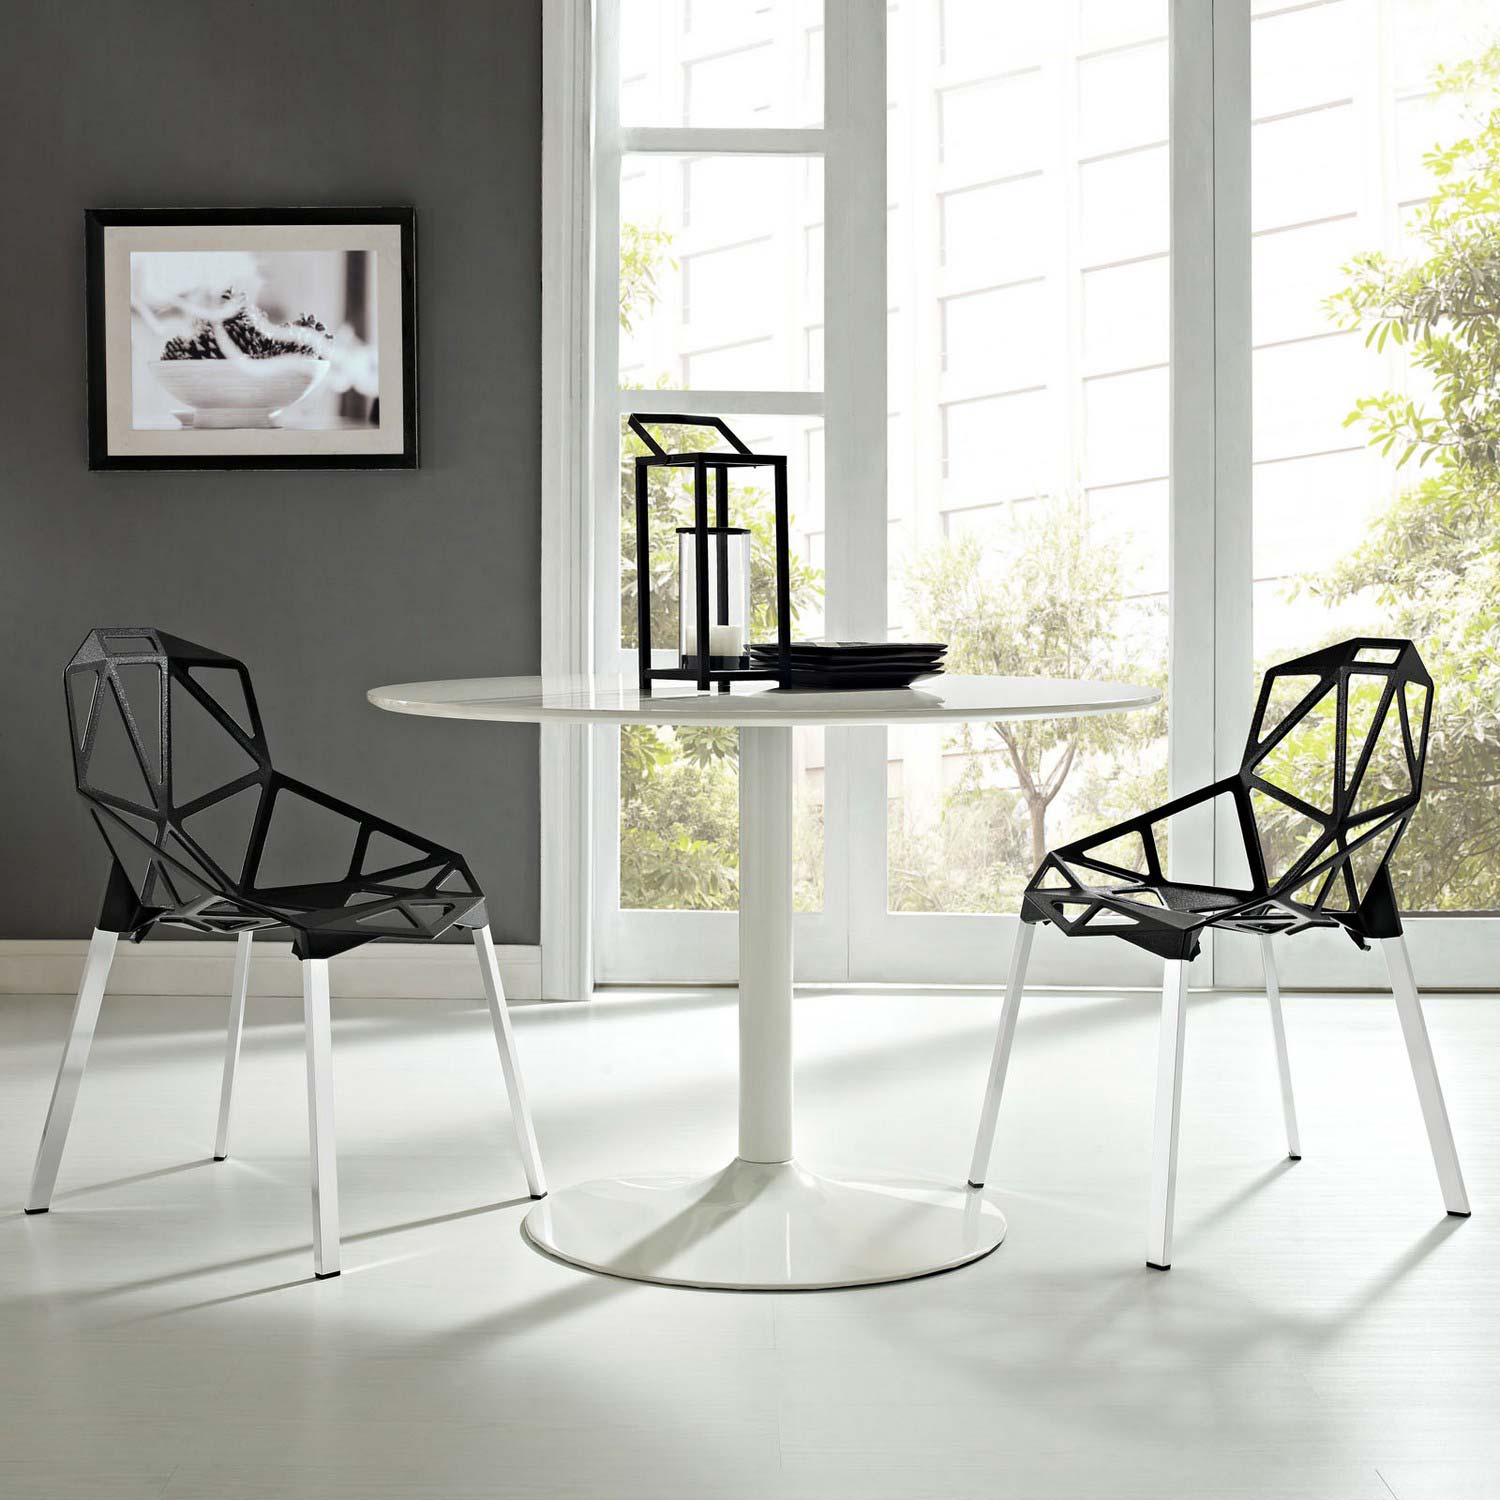 Modway Connections 2 PC Dining Chair Set - Black